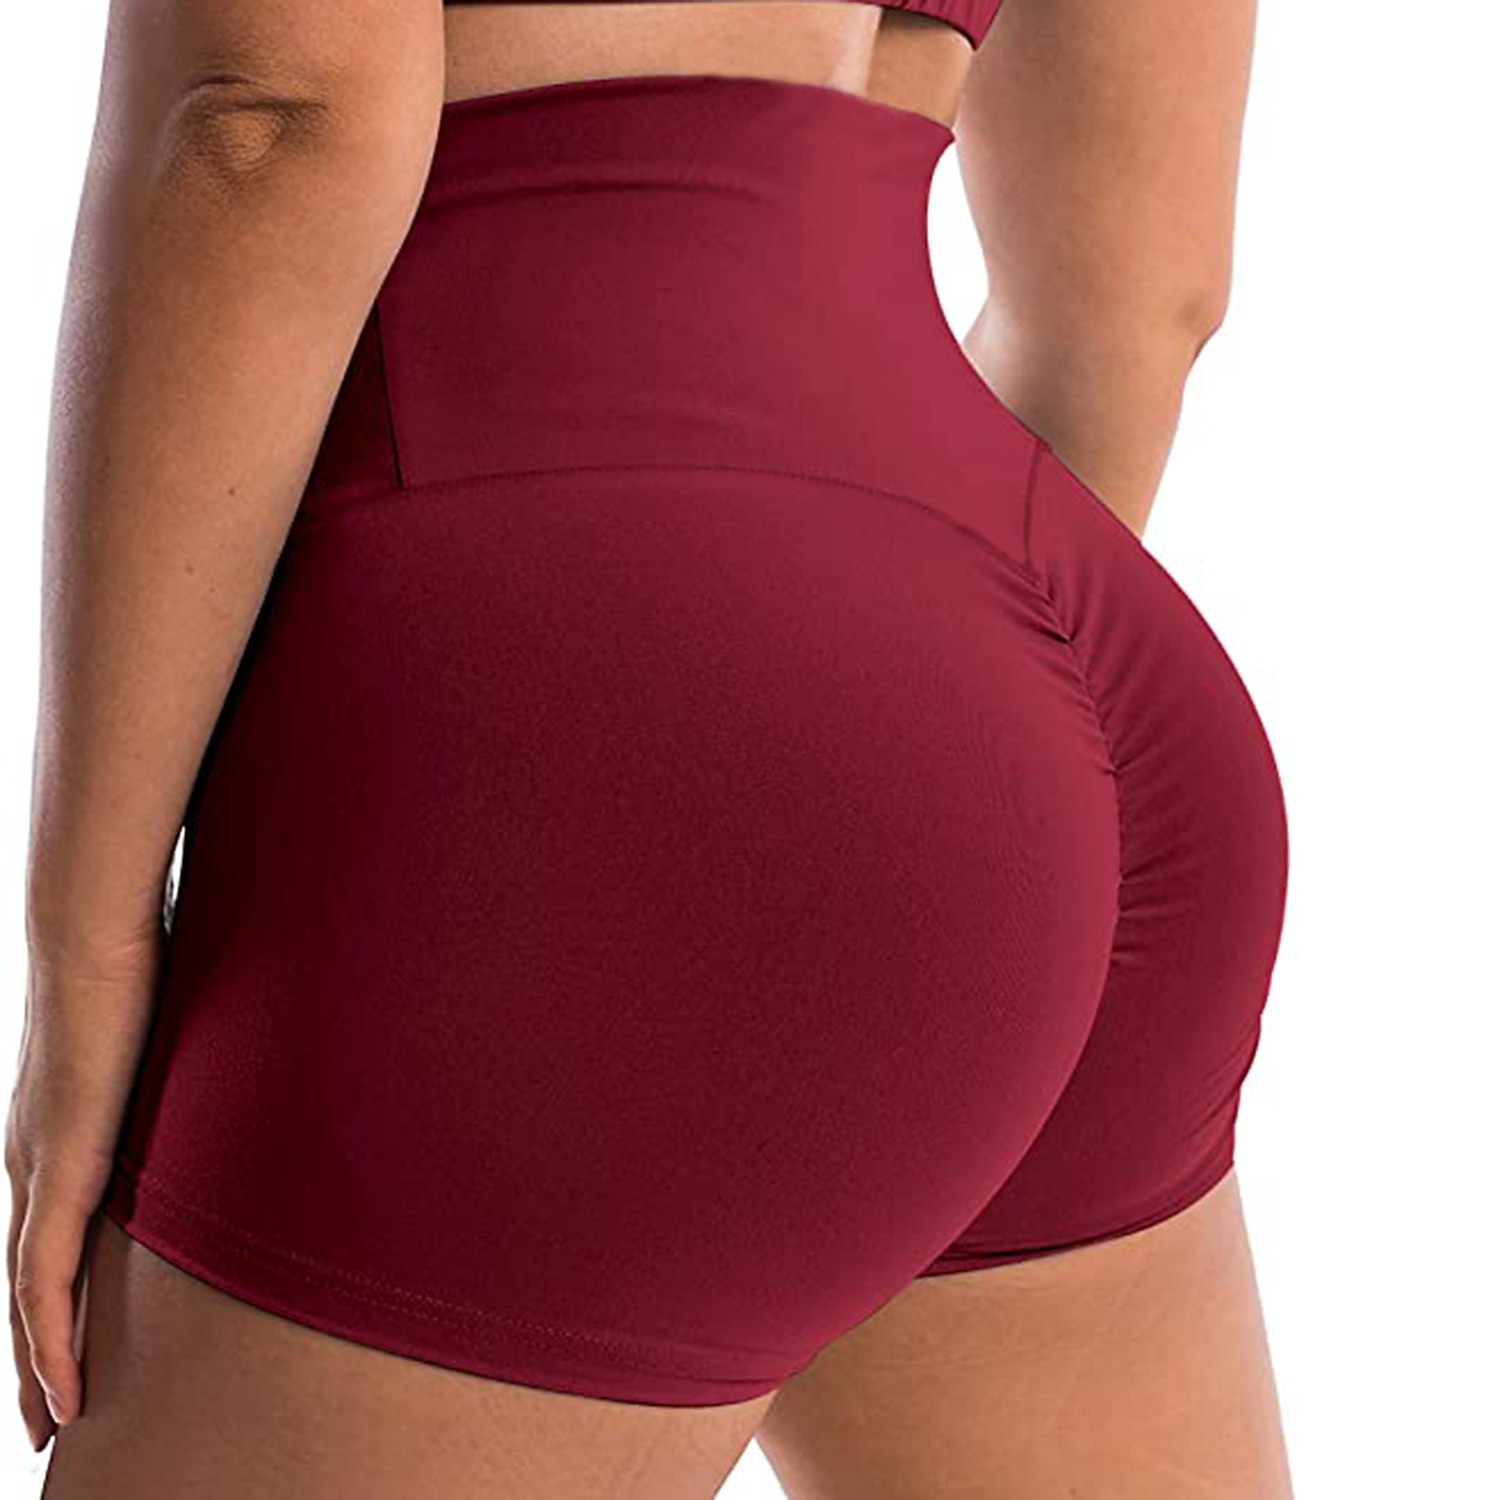 CHRLEISURE Workout Booty Spandex Shorts for Women, High Waist Soft Yoga  Shorts, Pack of 3 - Black/Burgundy/Green, S price in UAE,  UAE